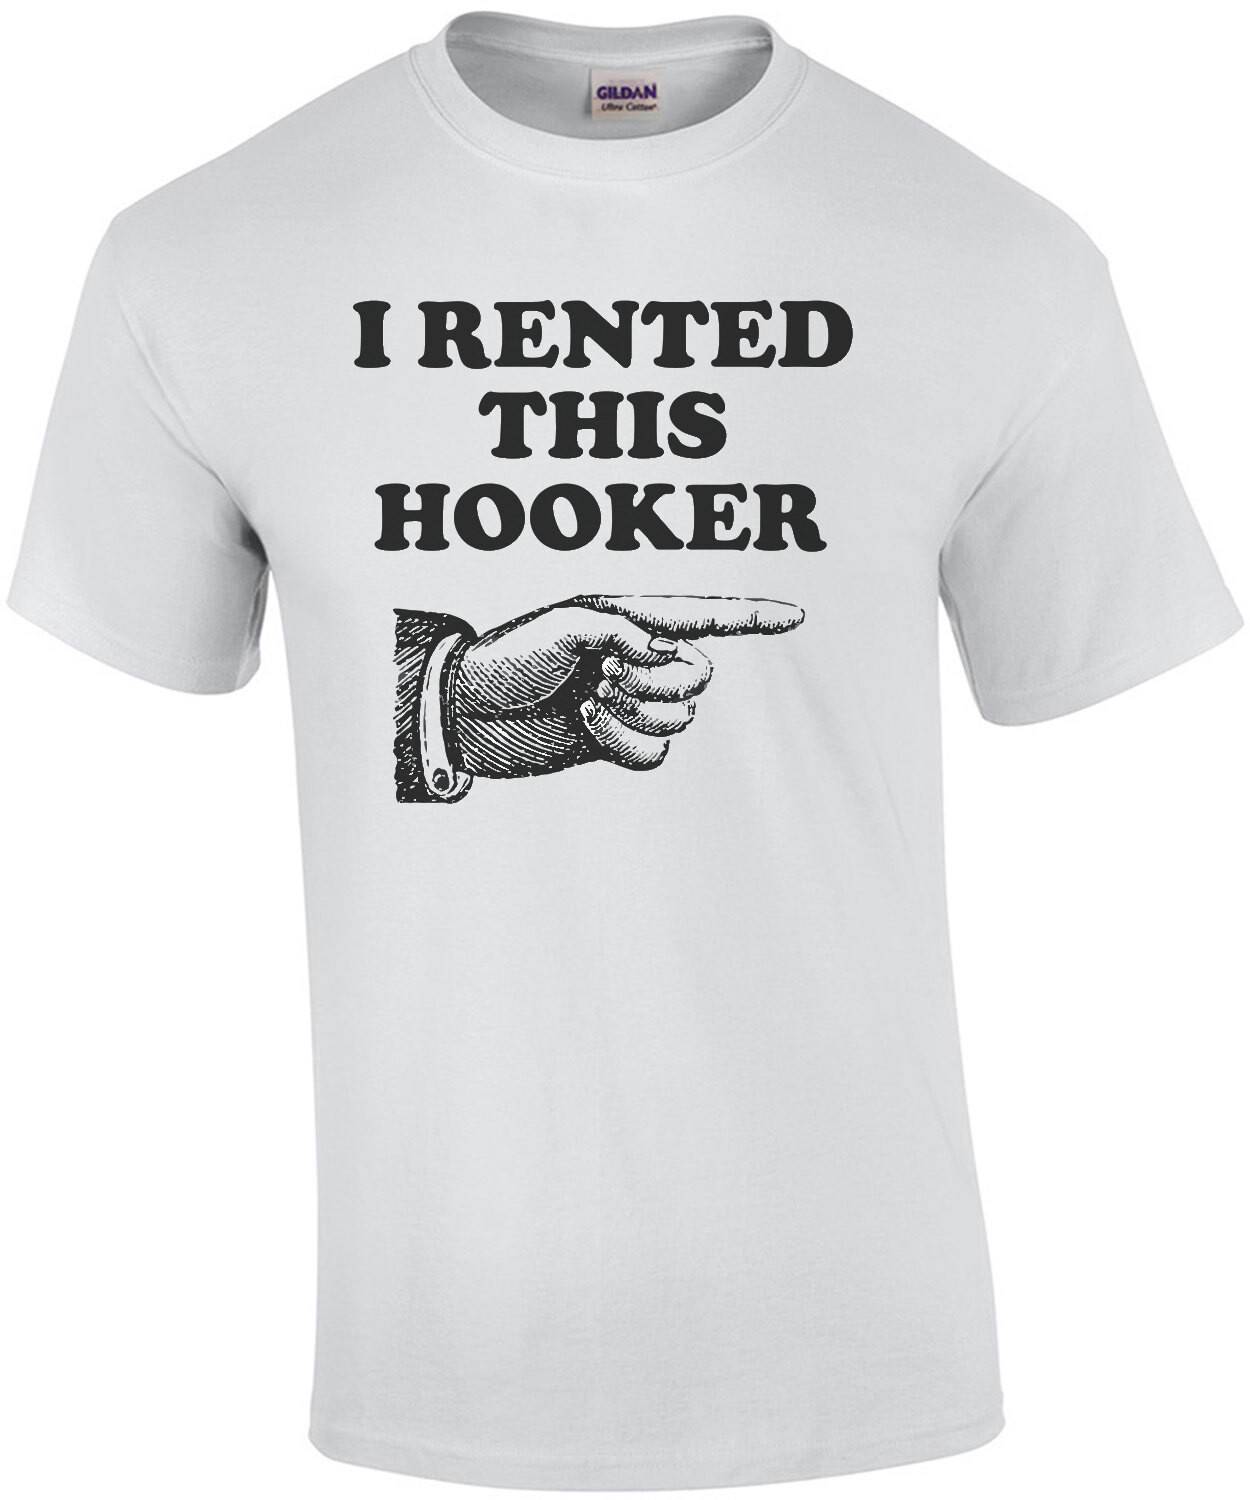 I rented this hooker - funny couple's t-shirt